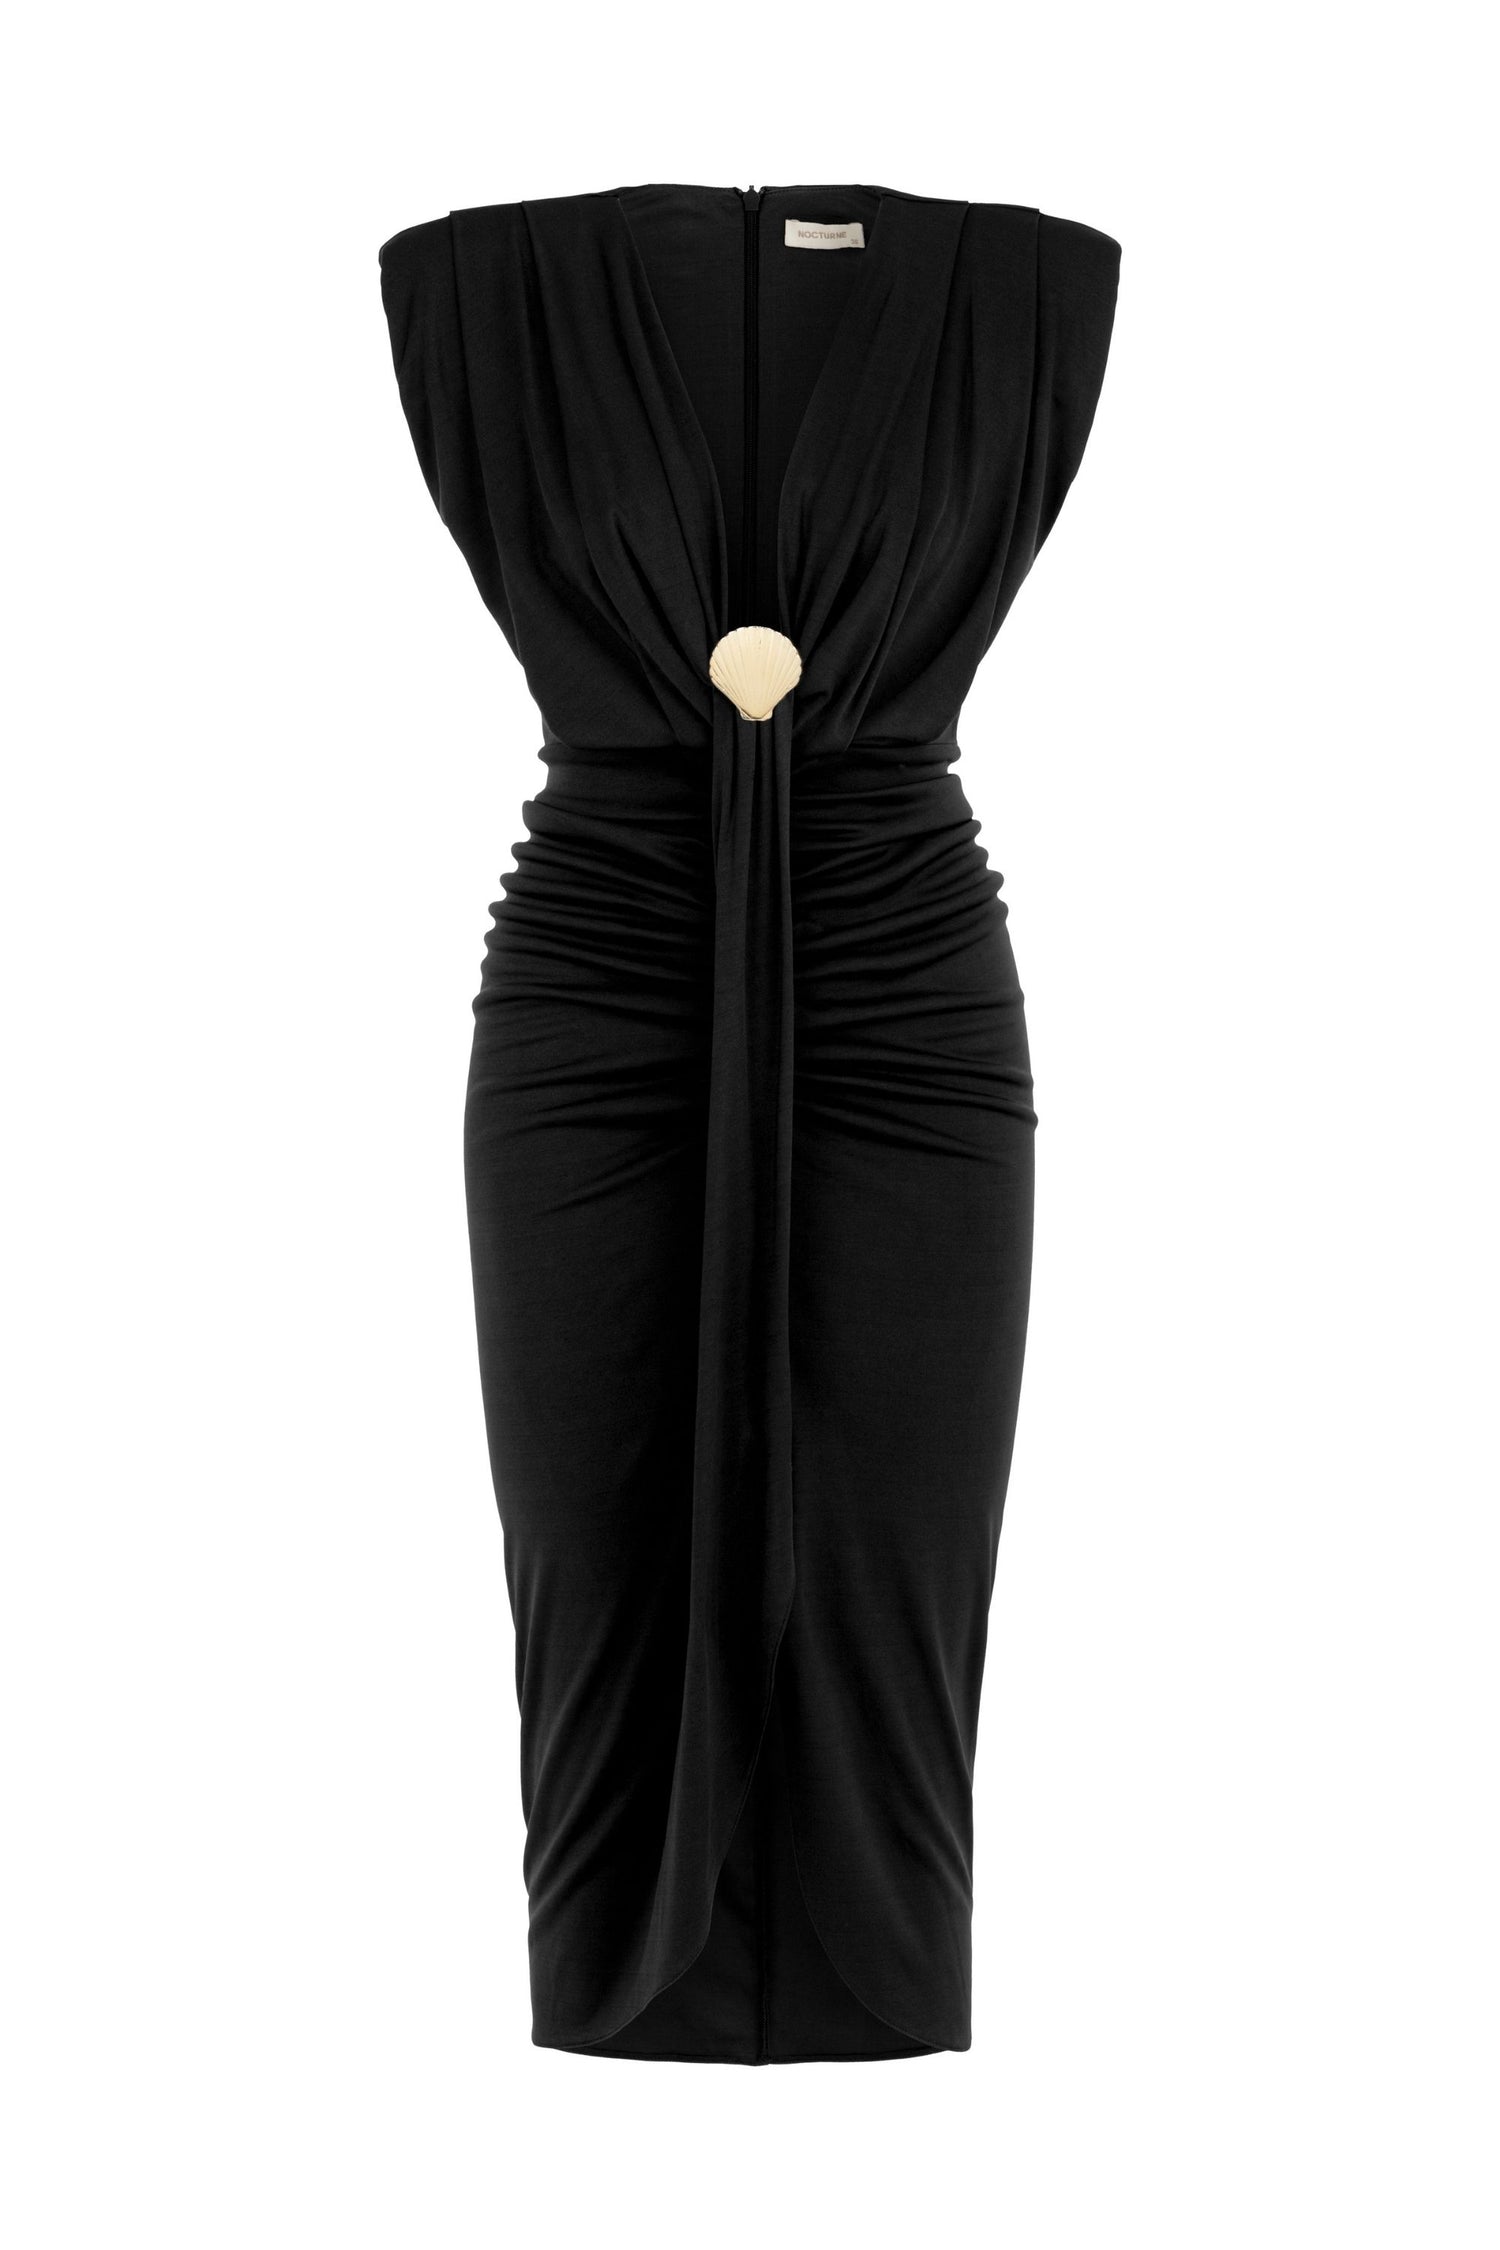 Draped Dress with Shoulder Pad